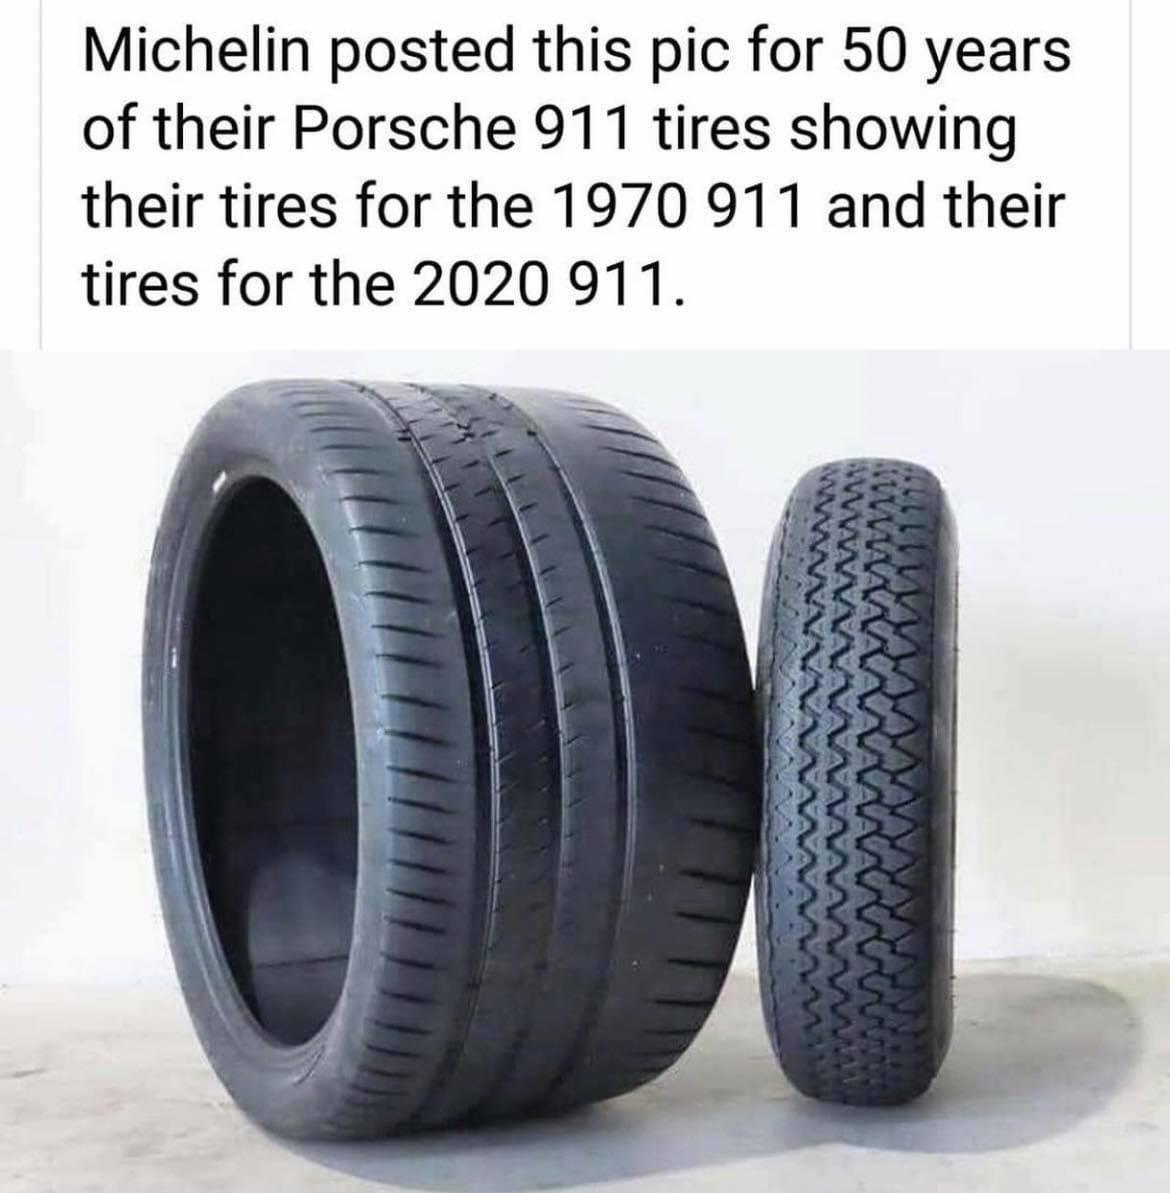 synthetic rubber - Michelin posted this pic for 50 years of their Porsche 911 tires showing their tires for the 1970 911 and their tires for the 2020 911.